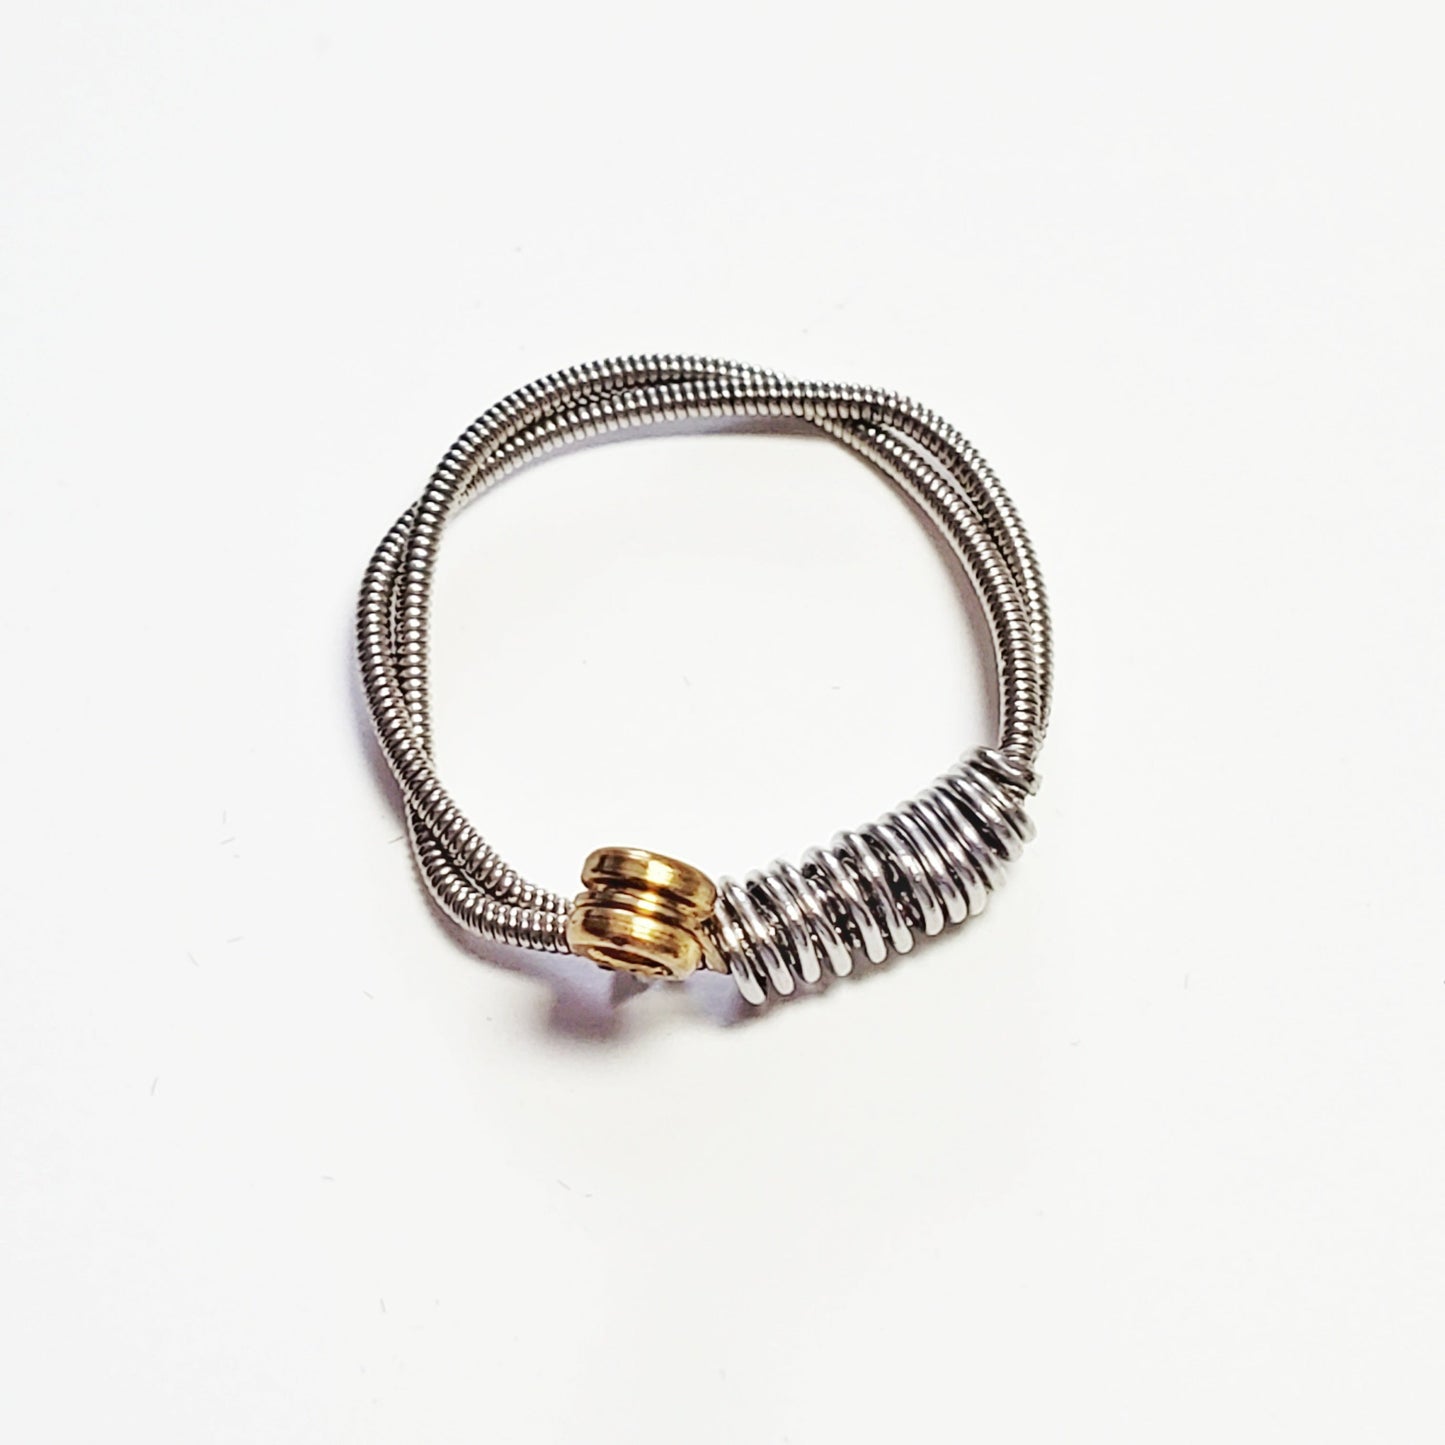 a silver coloured guitar string ring - white background